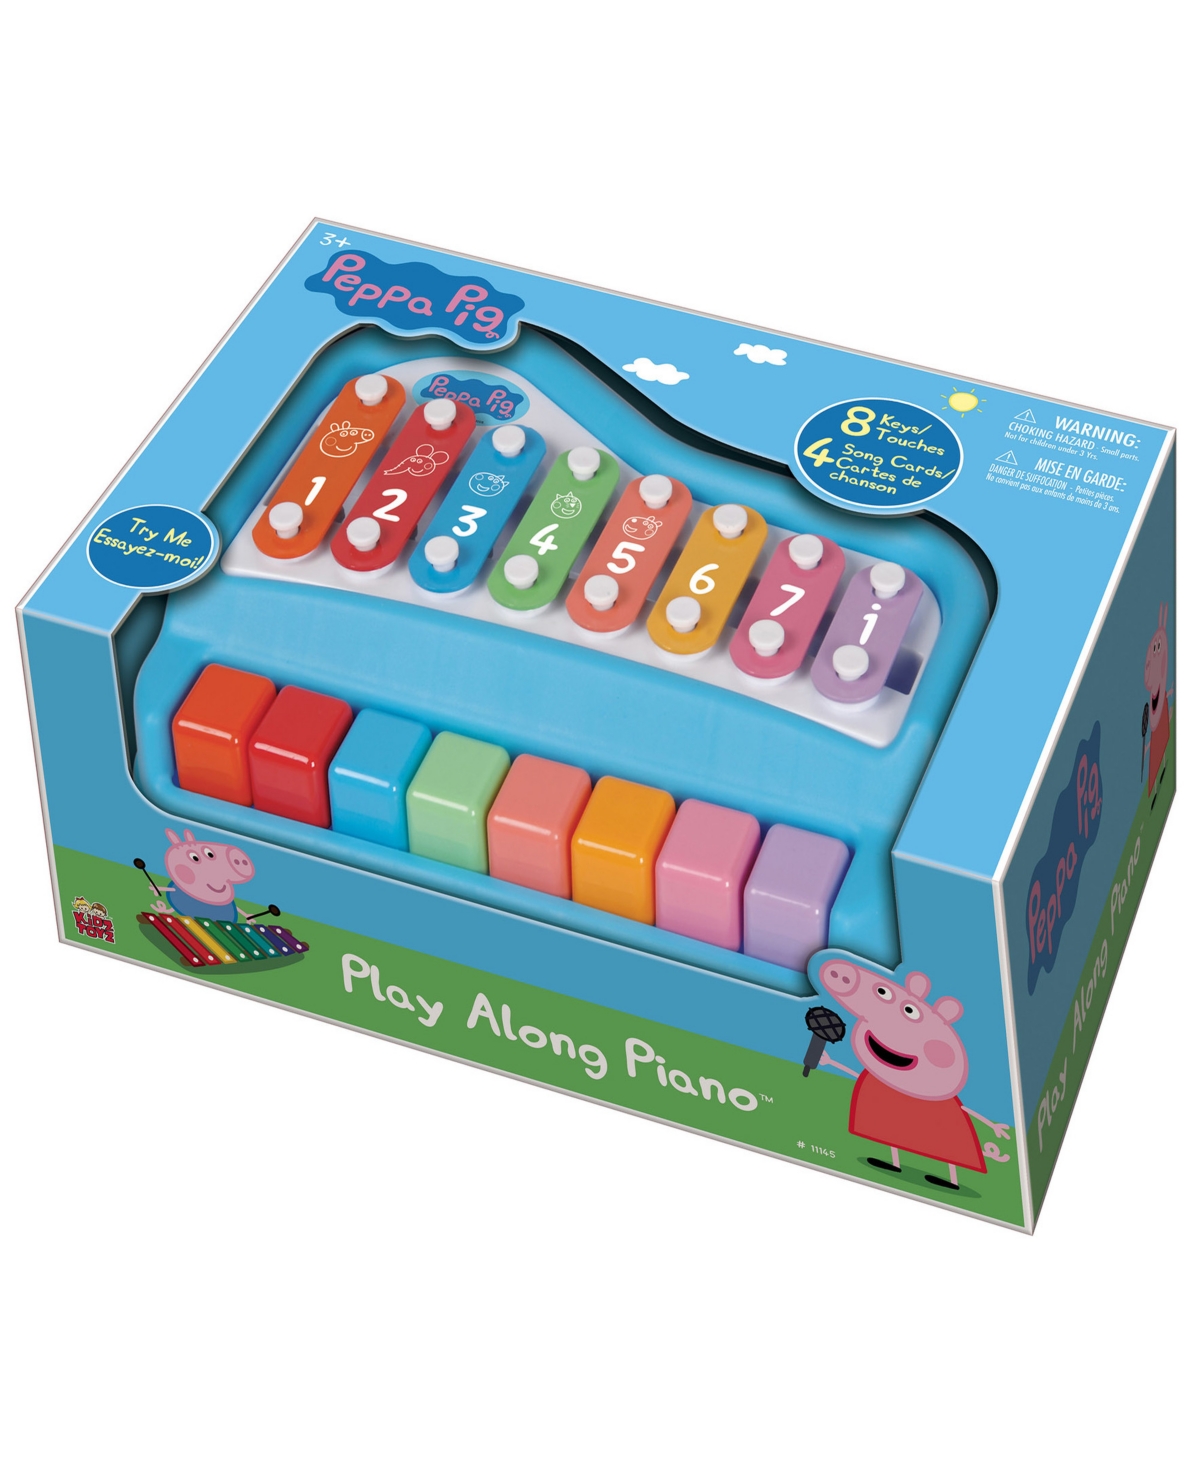 Peppa Pig Play Along Piano In Multi